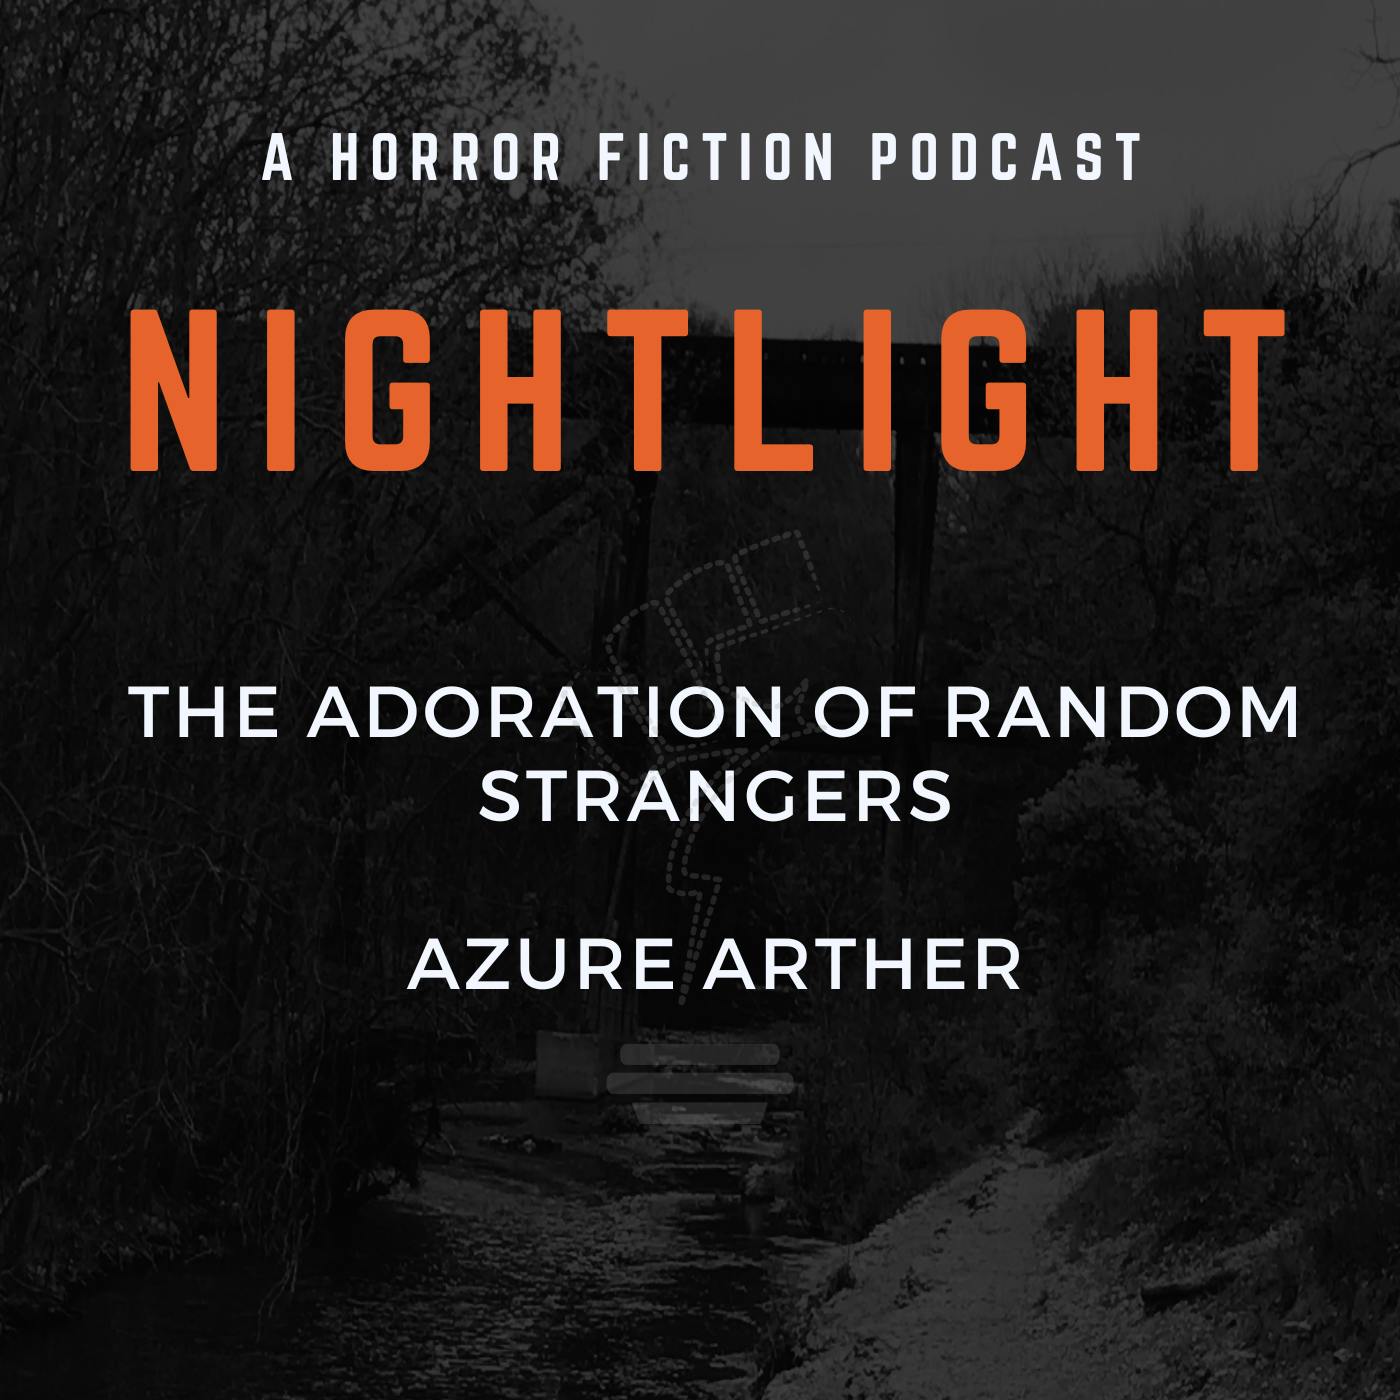 622: The Adoration of Random Strangers by Azure Arther